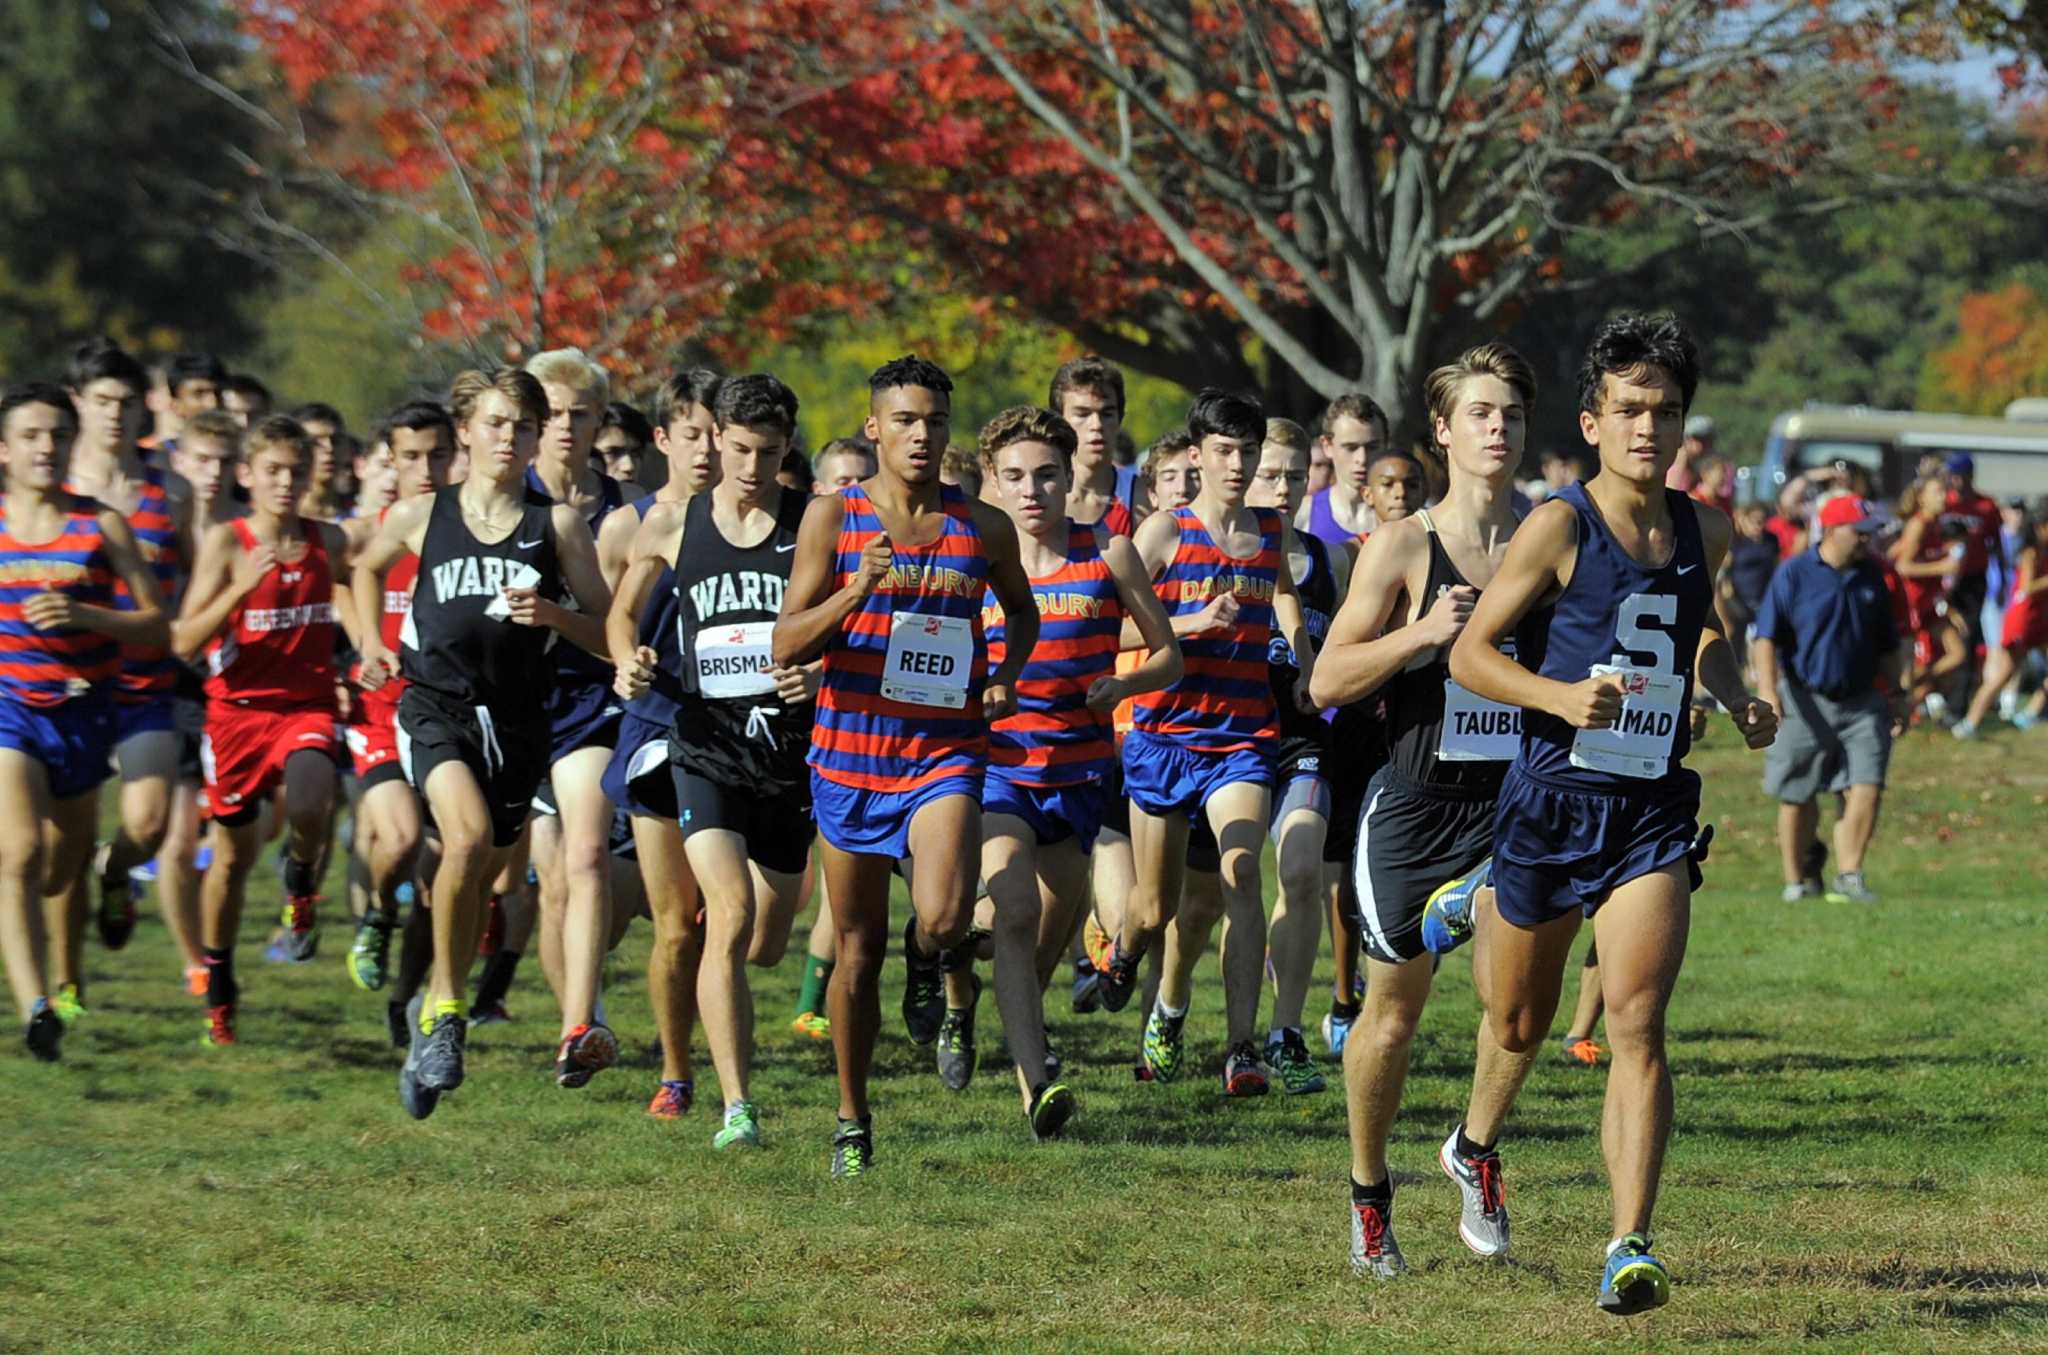 Staples cross country takes second at Nike regionals